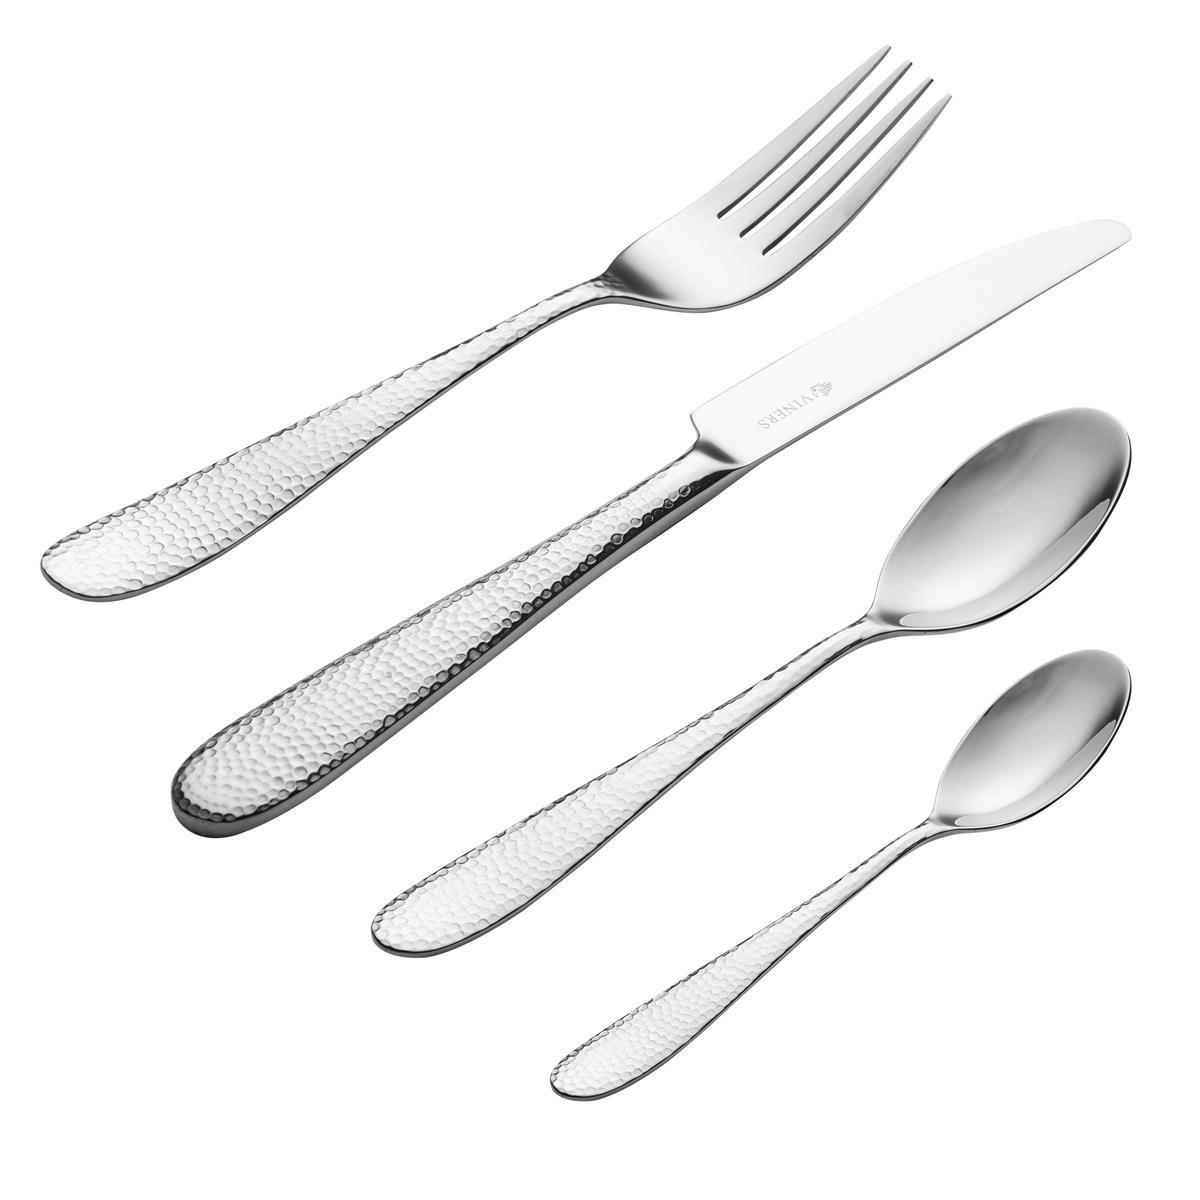 To whom are the Viners Glamour Cutlery Set knives not available for purchase?